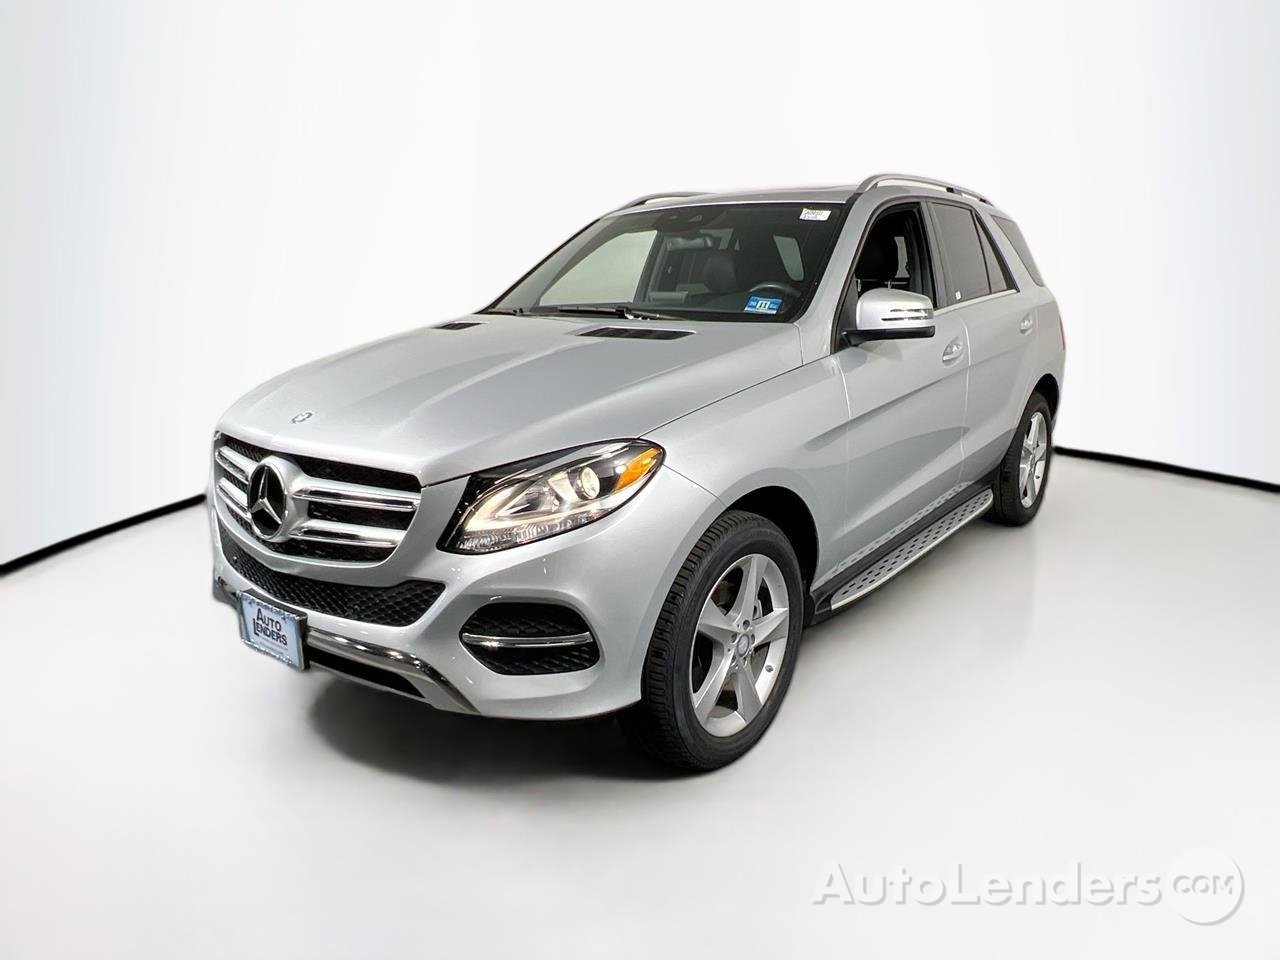 Used Mercedes-Benz GLE 300d for Sale Right Now - Autotrader